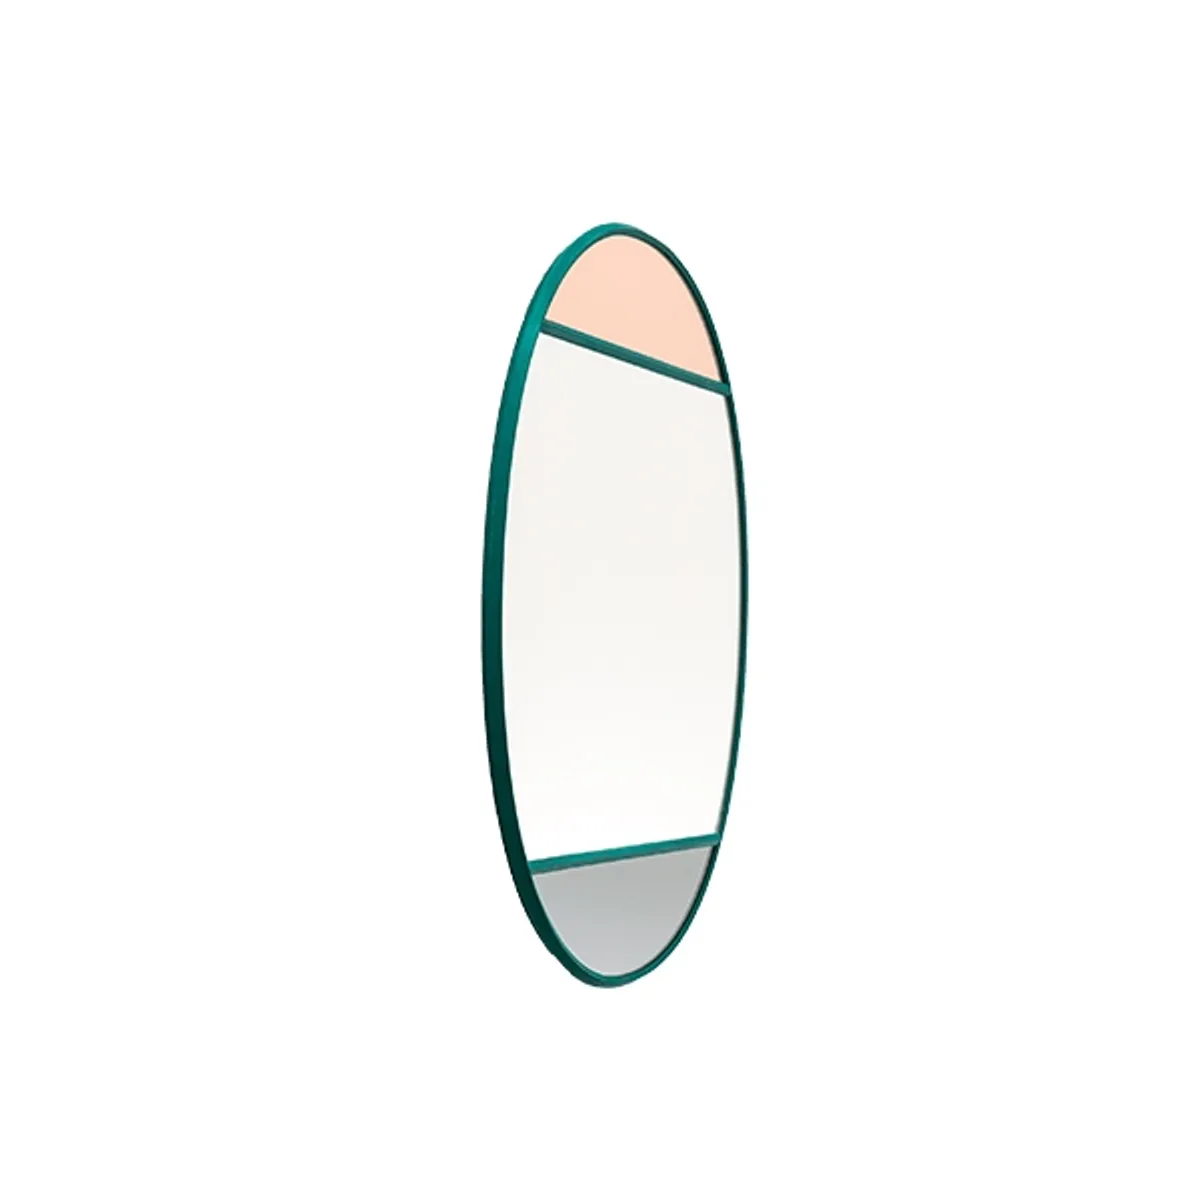 Vitrail oval mirror Inside Out Contracts2